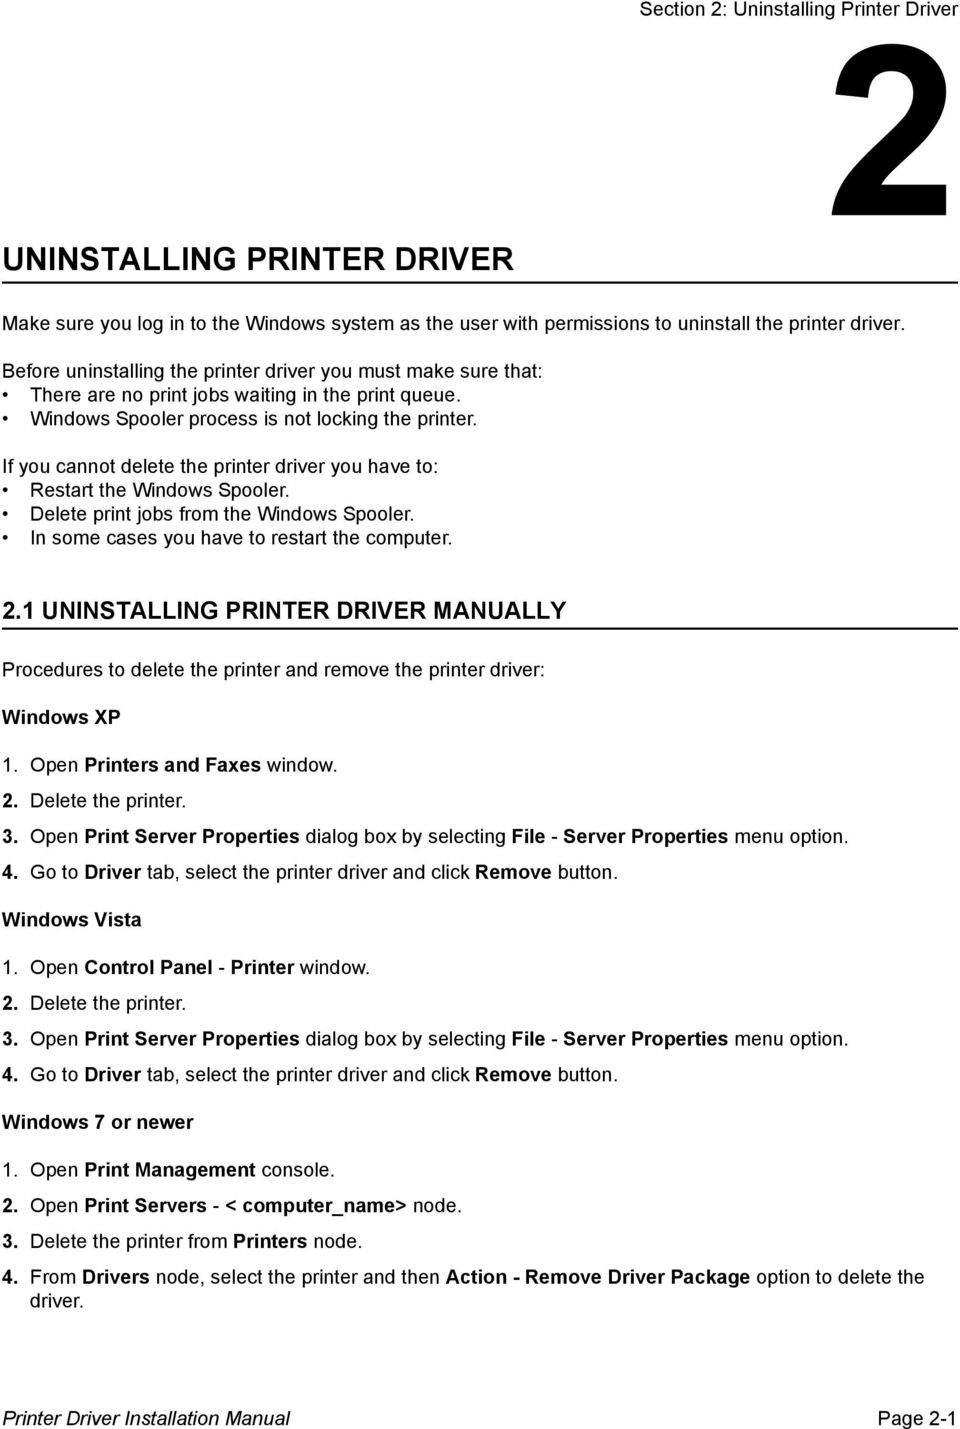 If you cannot delete the printer driver you have to: Restart the Windows Spooler. Delete print jobs from the Windows Spooler. In some cases you have to restart the computer. 2.